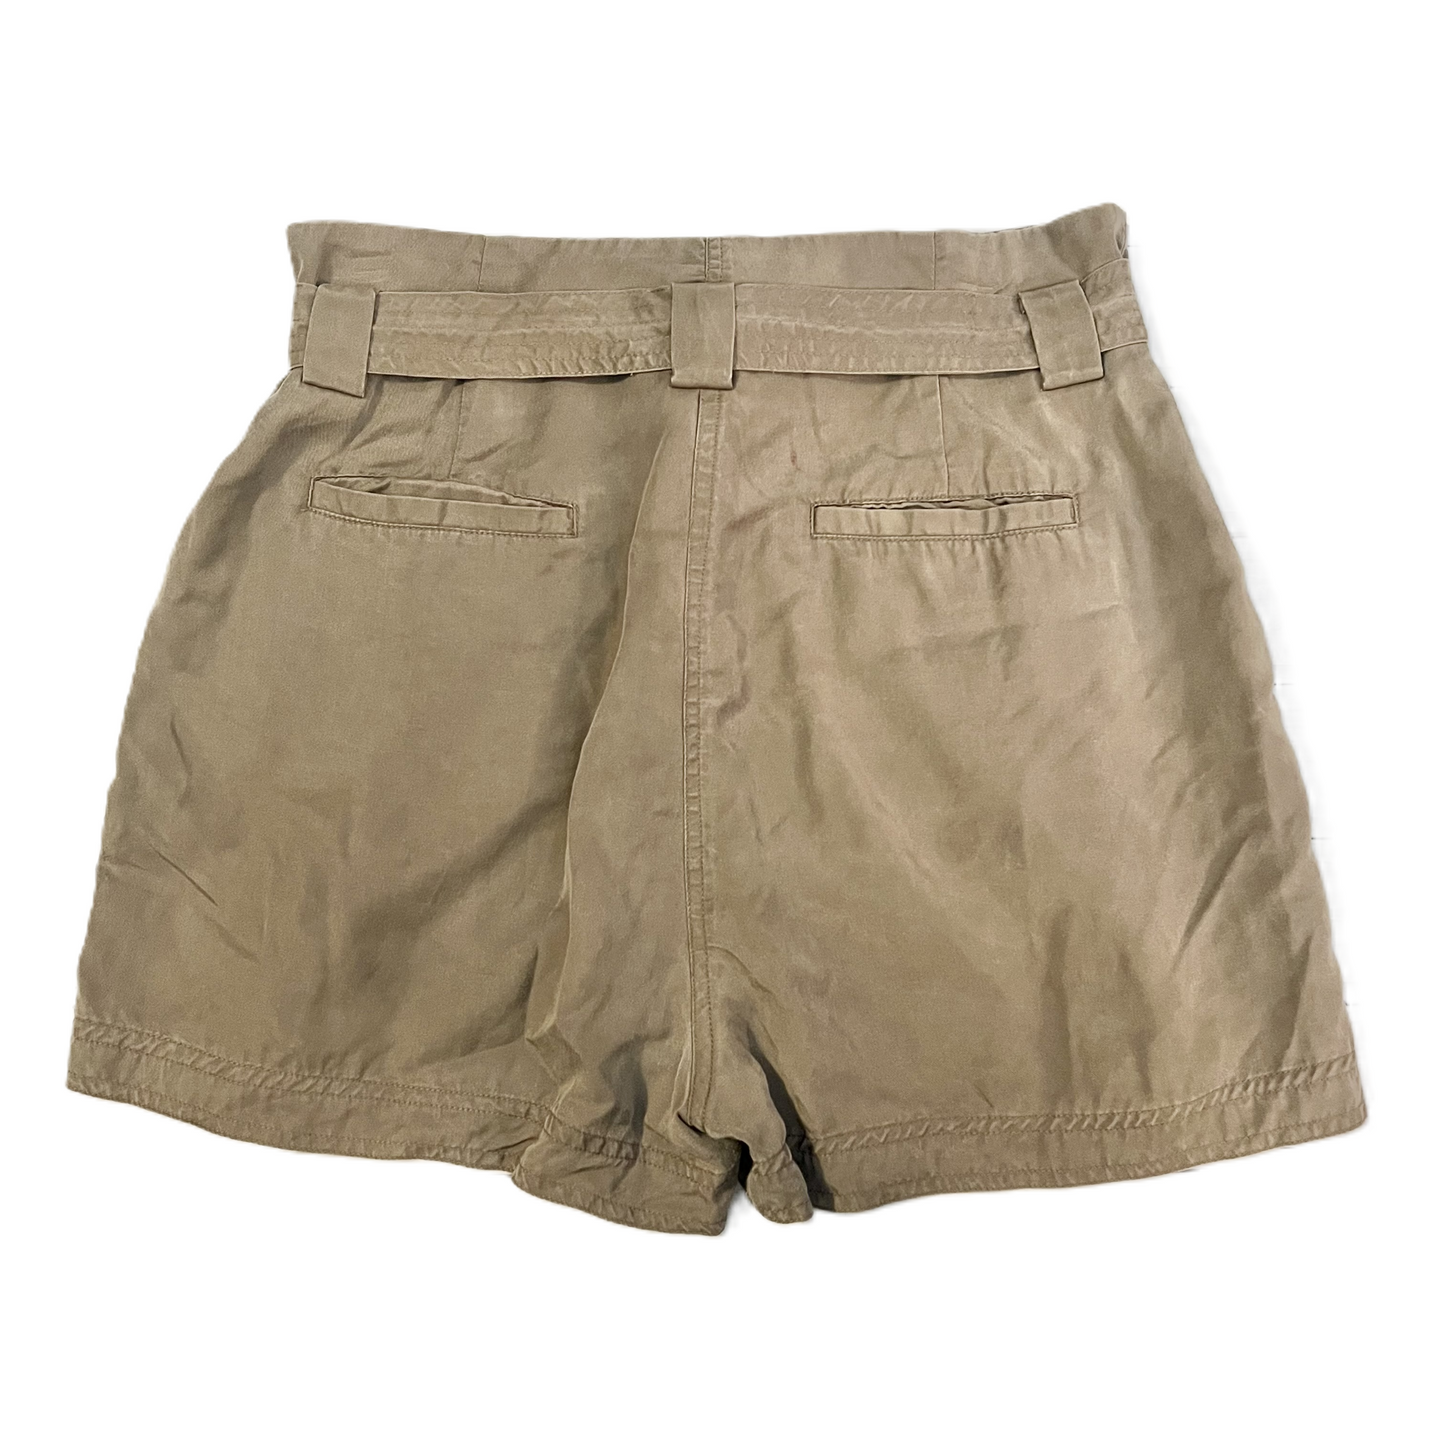 Shorts By Super Dry Size: 8